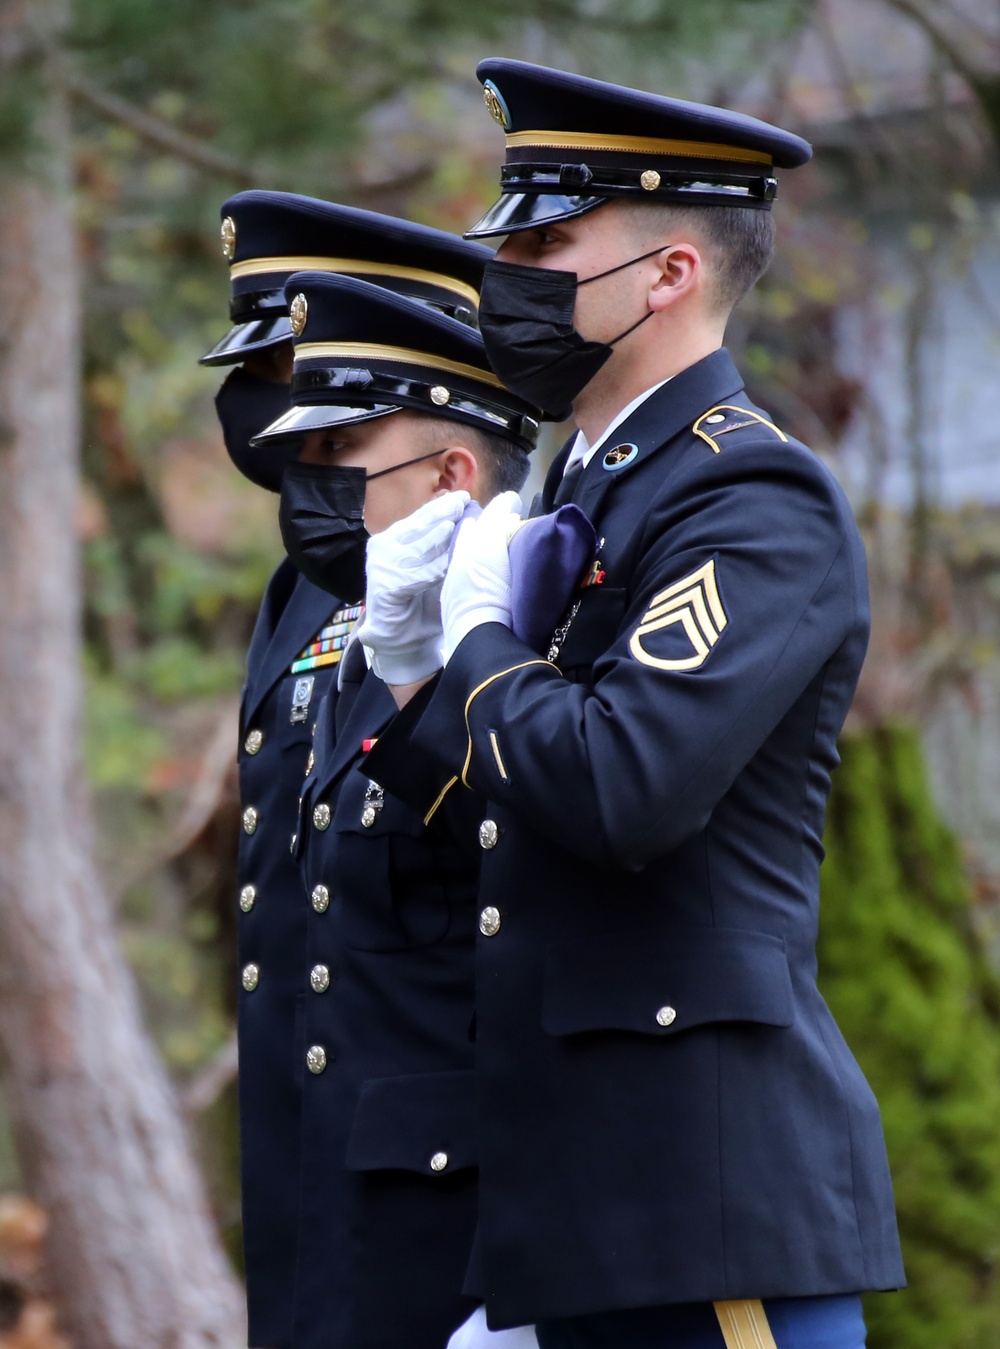 Washington National Guard and Royal Malaysian Air Force honor fallen colleague in unique ceremony